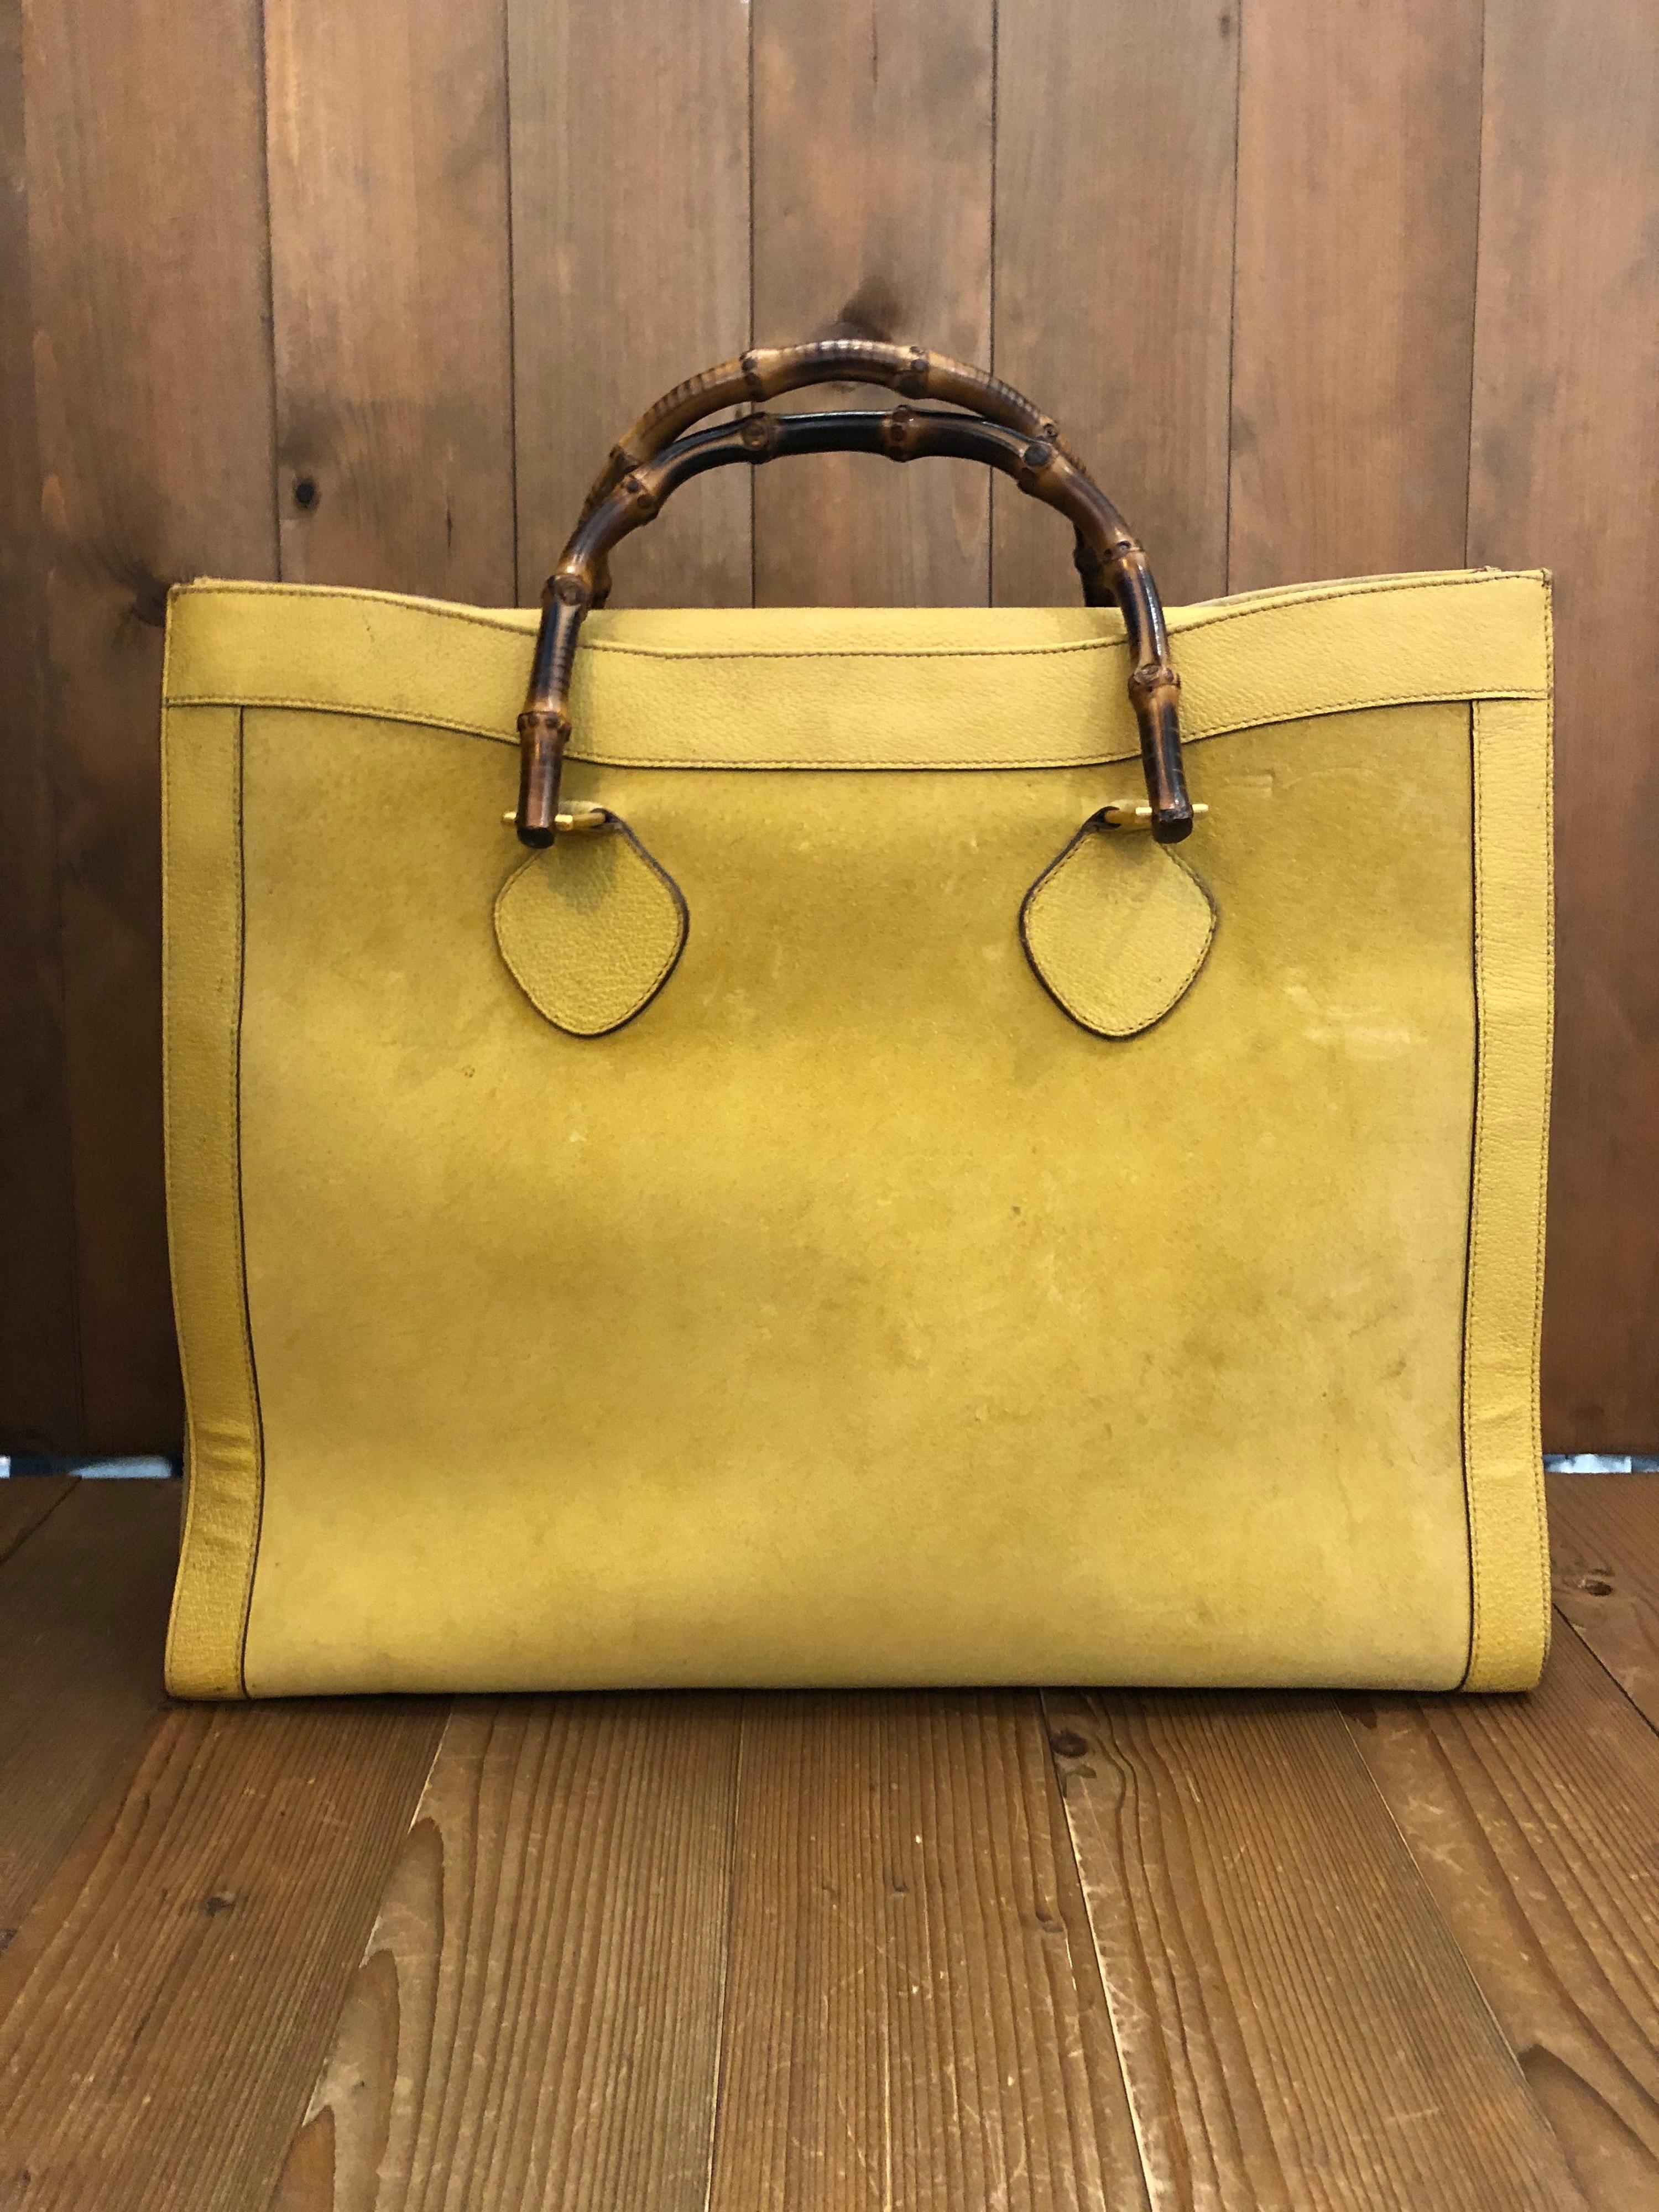 1990s Gucci bamboo tote in yellow suede and leather. The Bamboo tote is one of Princess Diana's favorite purses. Gucci revamped this Bamboo tote in 2021 winter collection. Made in Italy. Measures 16.5 x 14 x 5.25 inches handle drop 4” (large size)